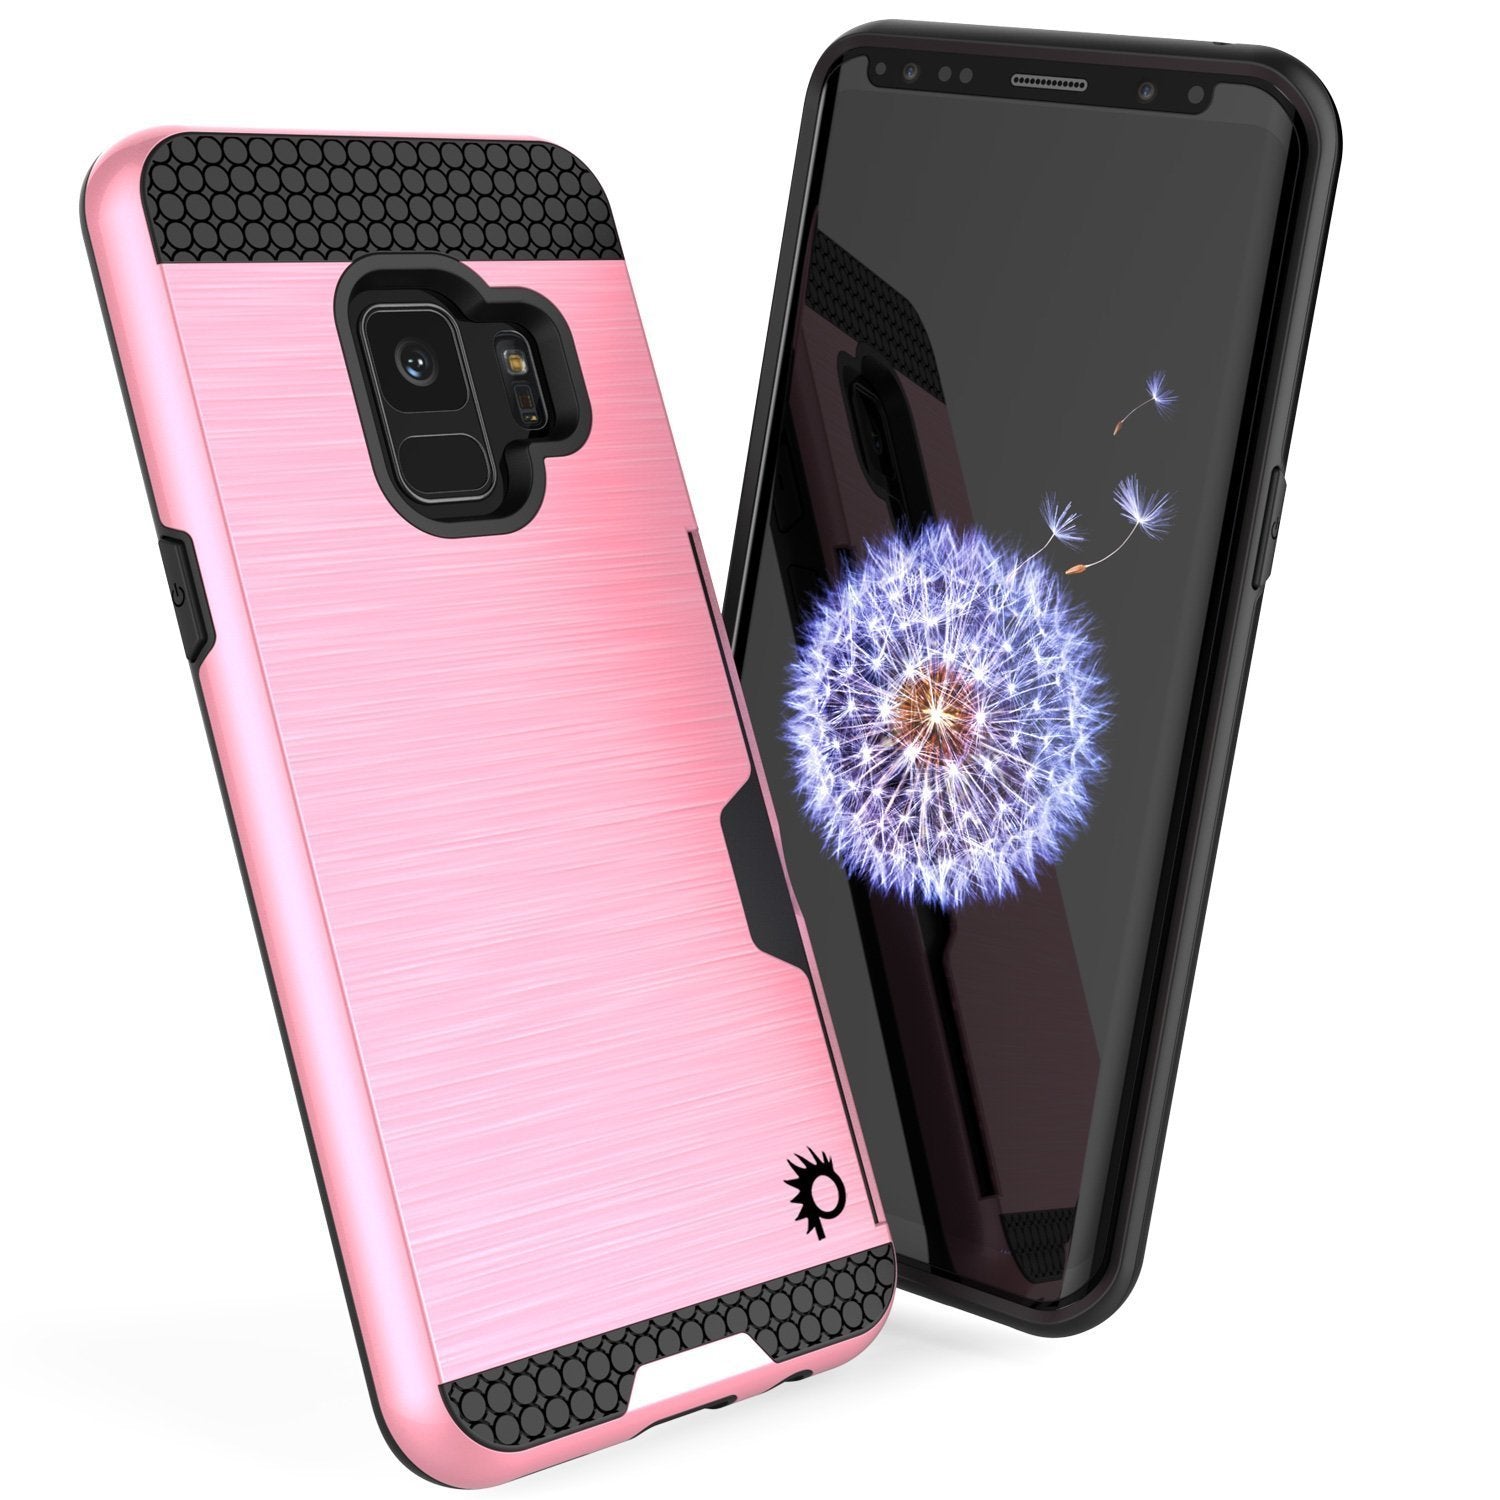 Galaxy S9 Case, PUNKcase [SLOT Series] [Slim Fit] Dual-Layer Armor Cover w/Integrated Anti-Shock System, Credit Card Slot [Pink]